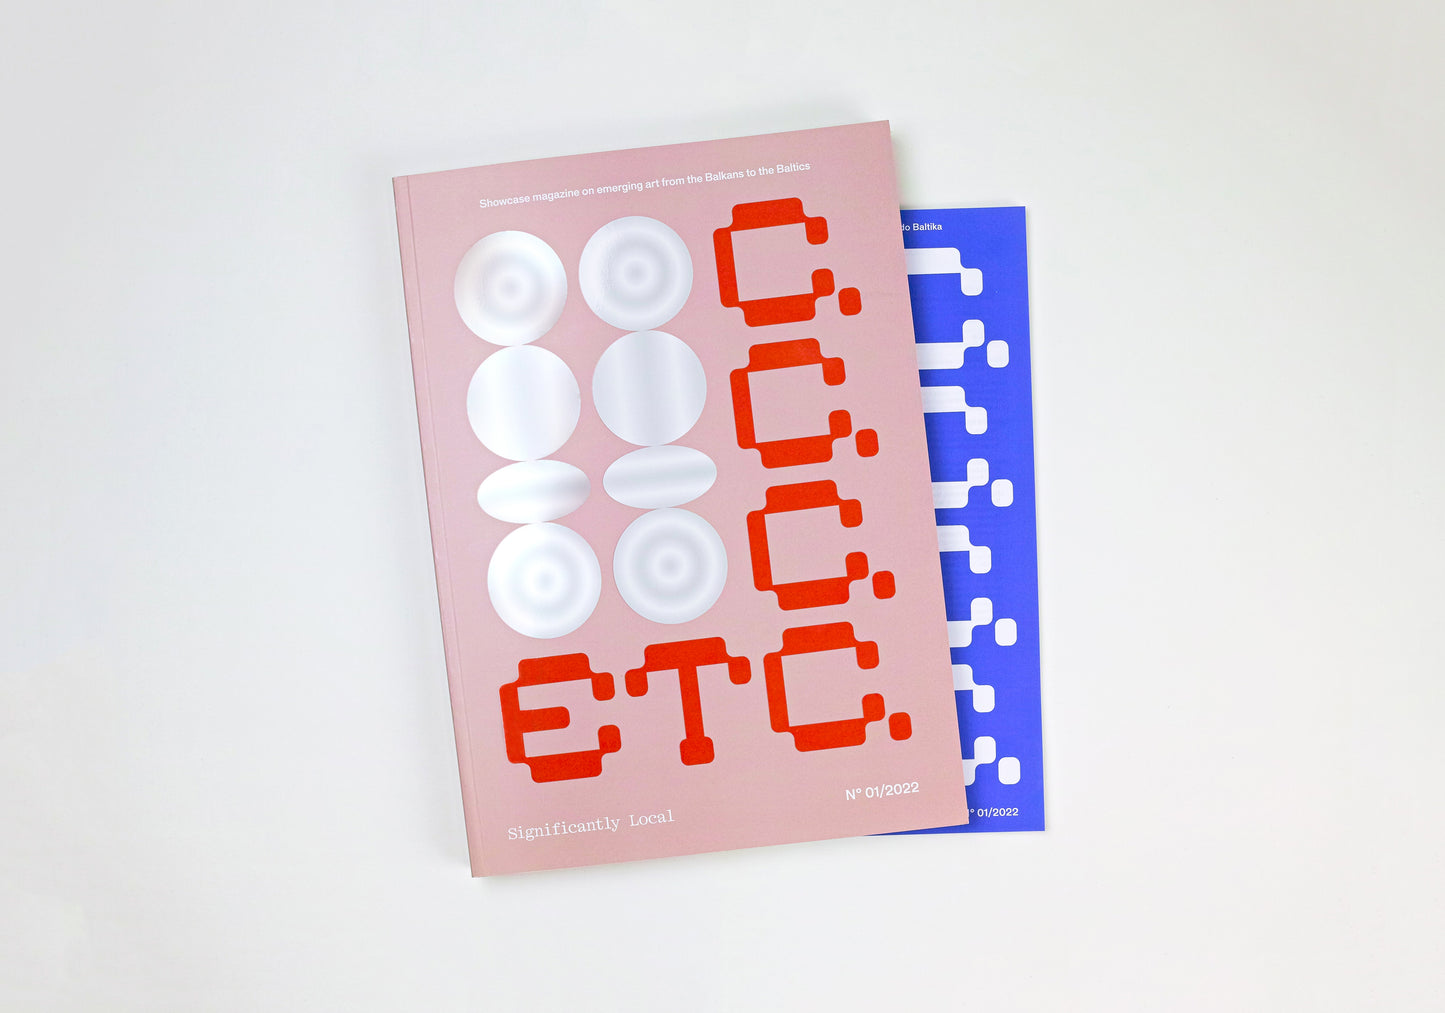 ETC. Magazine Set / Significantly Local #1 + Fever Dream #2